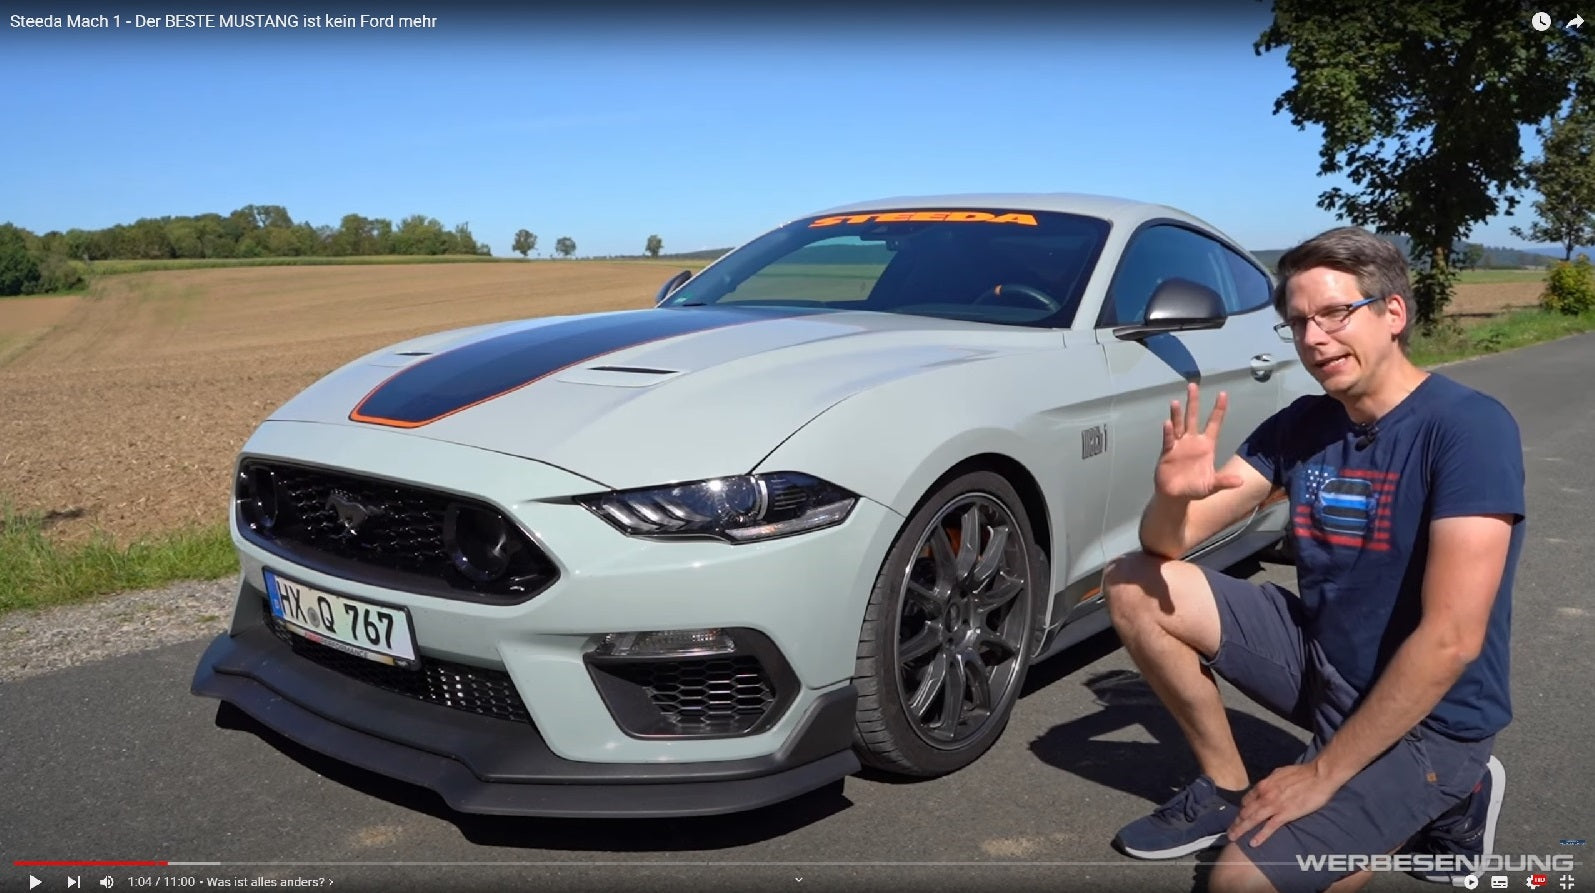 "The Best Mustang is NOT a Ford!" - Video Review from Modern Muscle Cars (German)